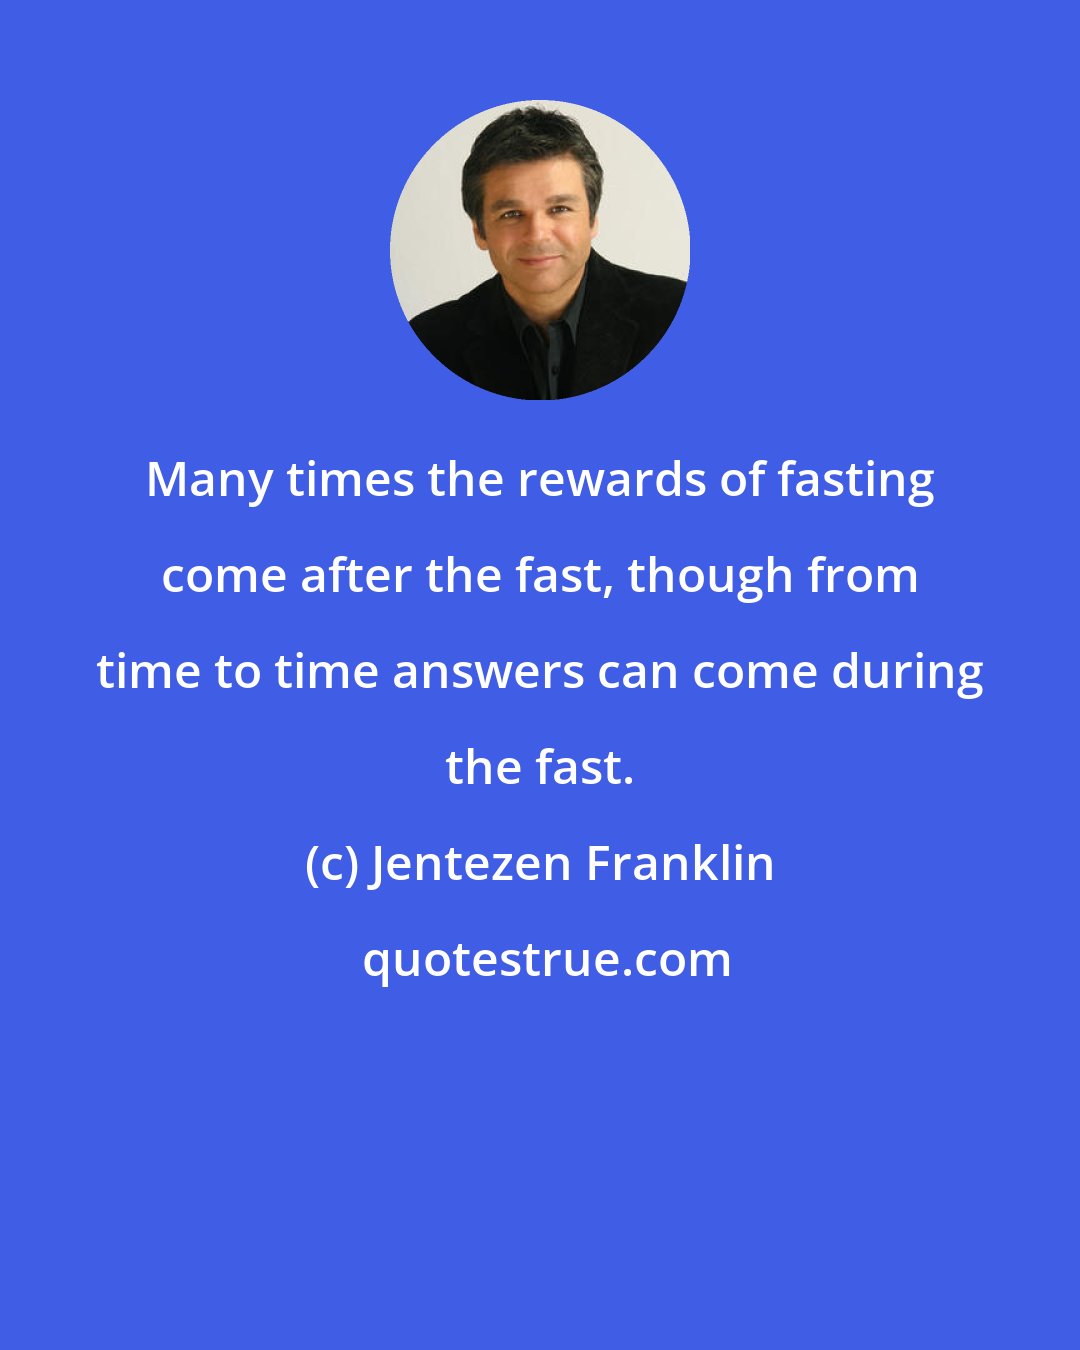 Jentezen Franklin: Many times the rewards of fasting come after the fast, though from time to time answers can come during the fast.